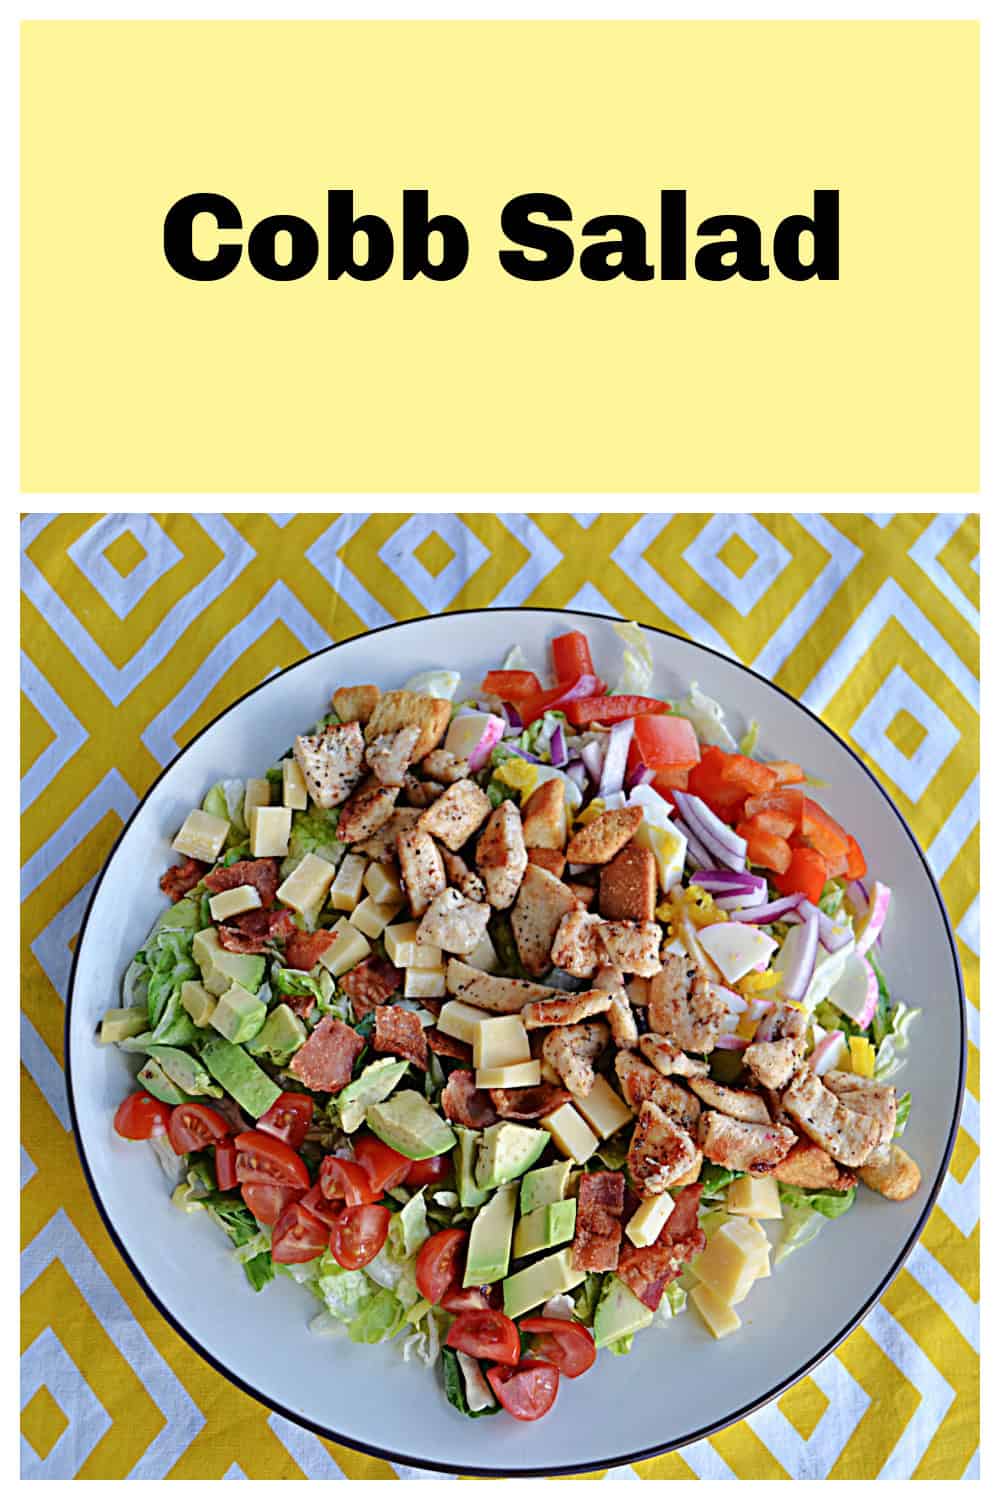 Pin Image:  Text title, a plate of Cobb Salad.